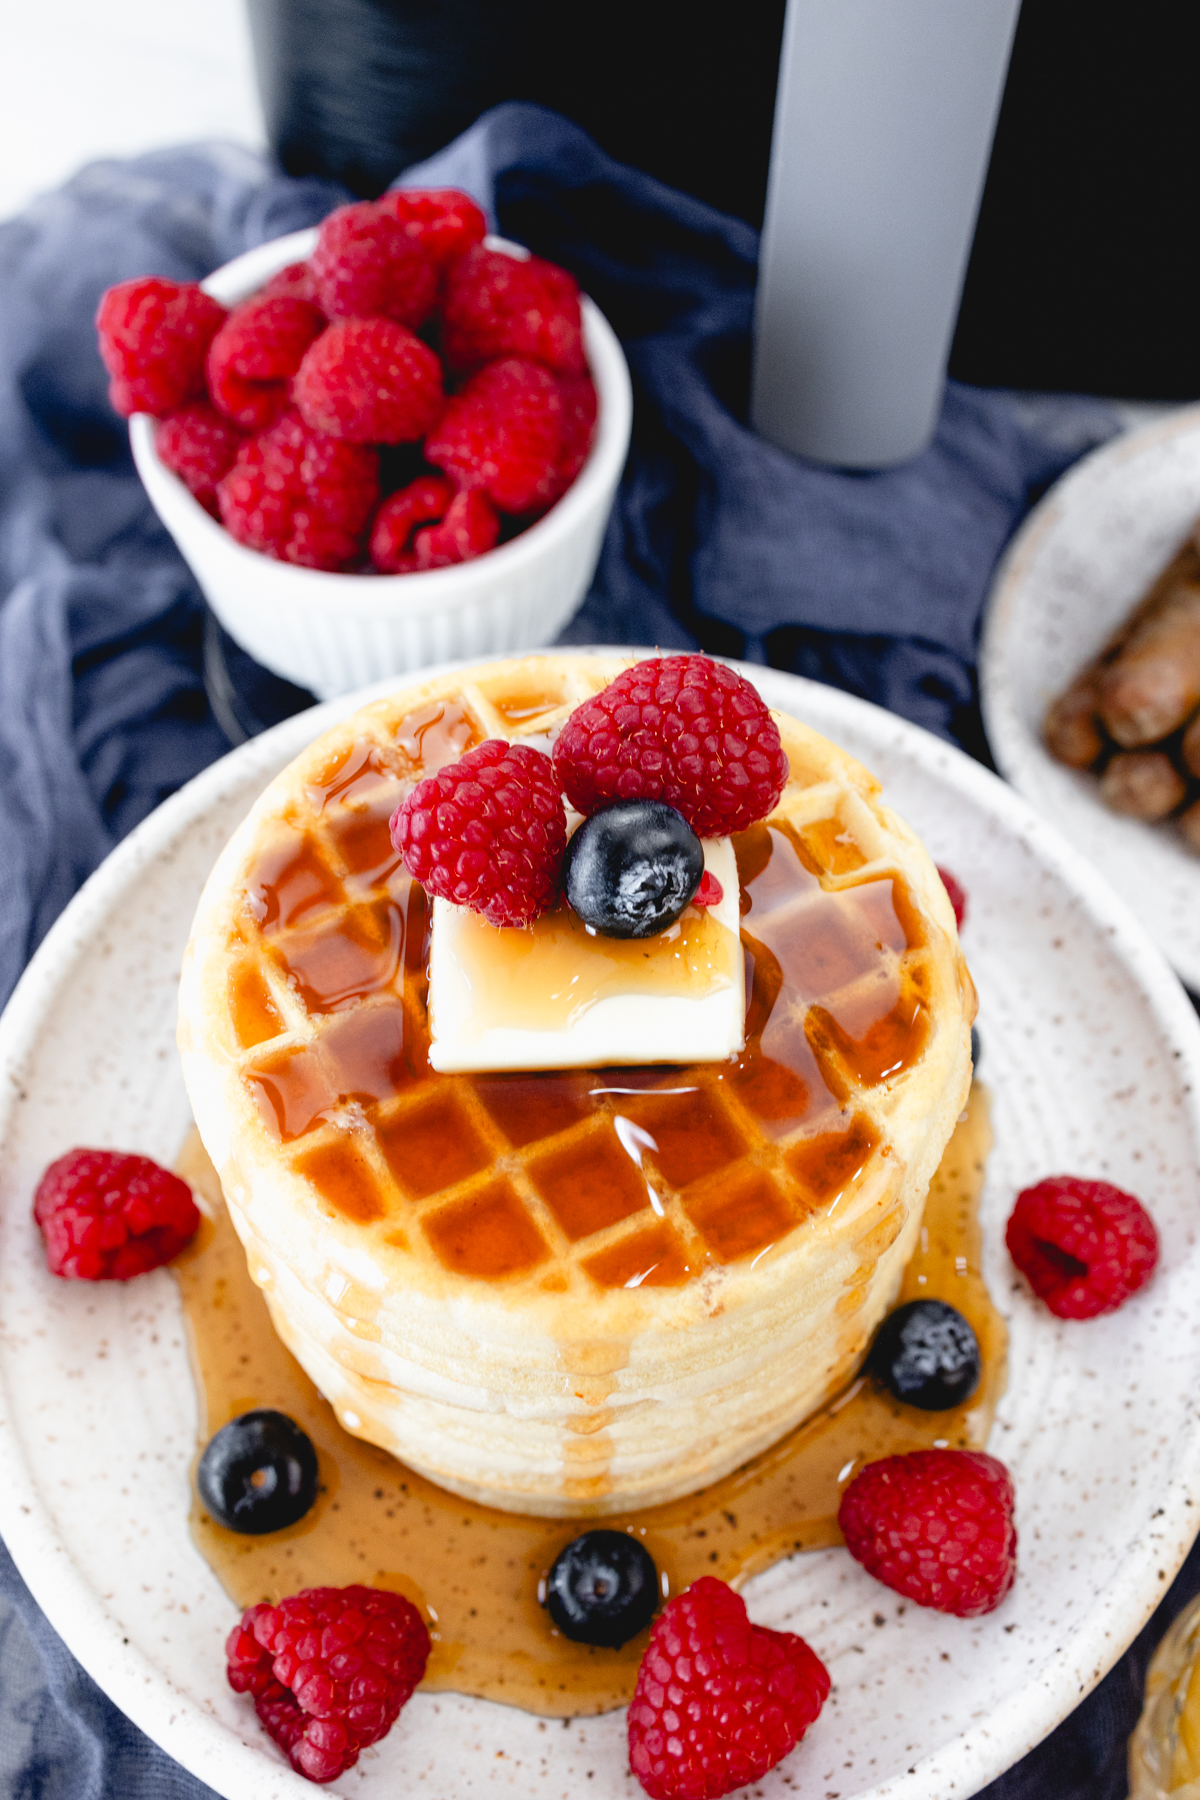 Close up view of a stack of waffles on a plate, topped with syrup, butter, and berries. Behind the plate is an air fryer and a bowl of berries.